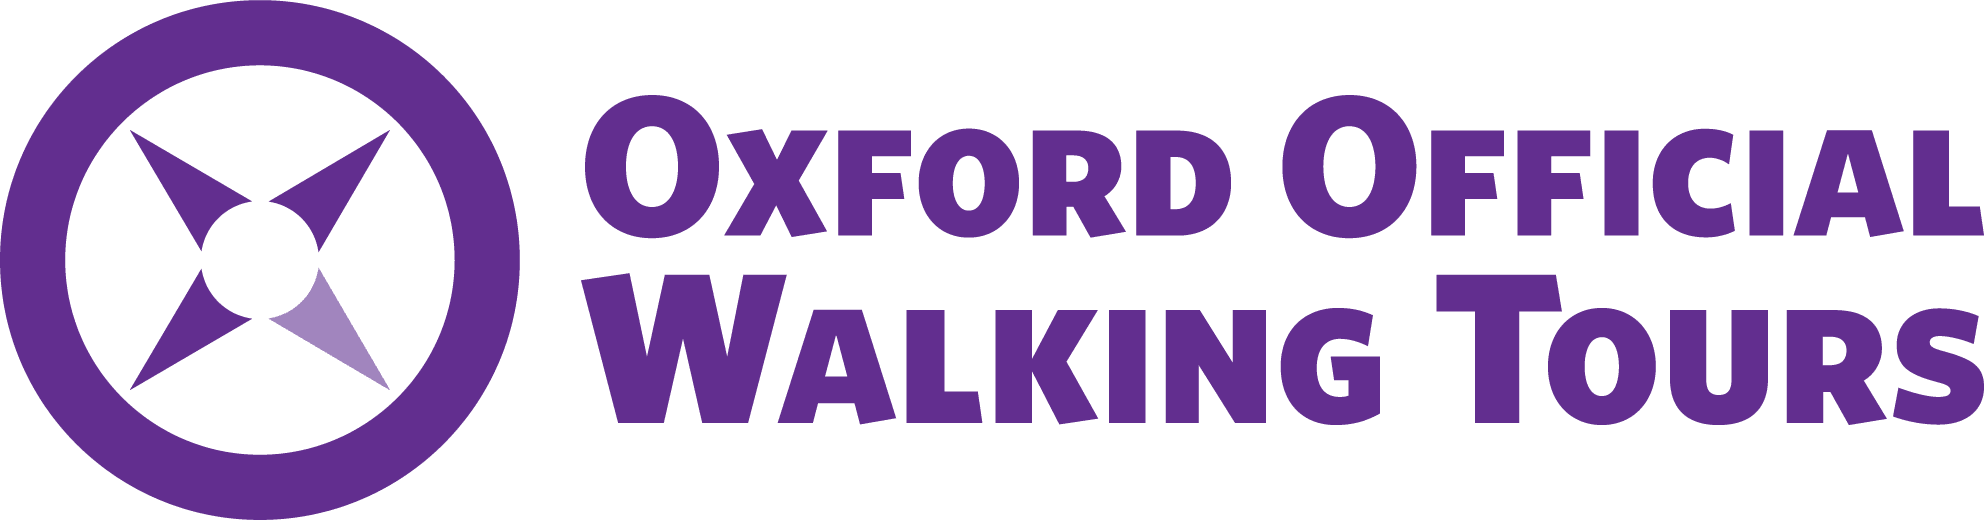 Oxford Official Walking Tours